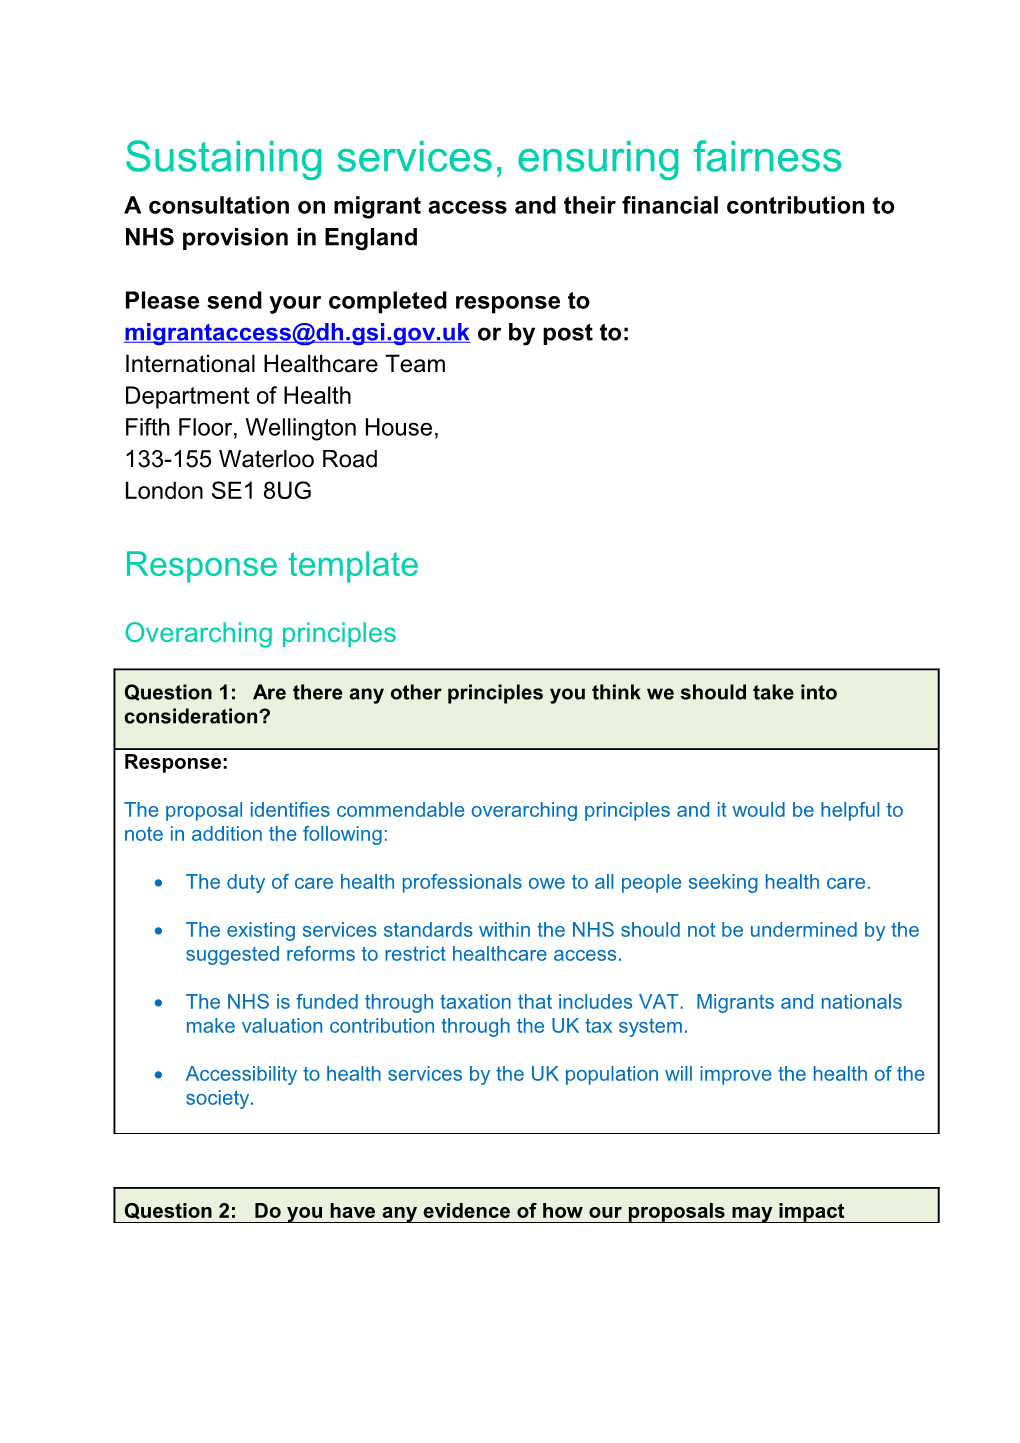 A Consultation on Migrant Access and Their Financial Contribution to NHS Provision in England